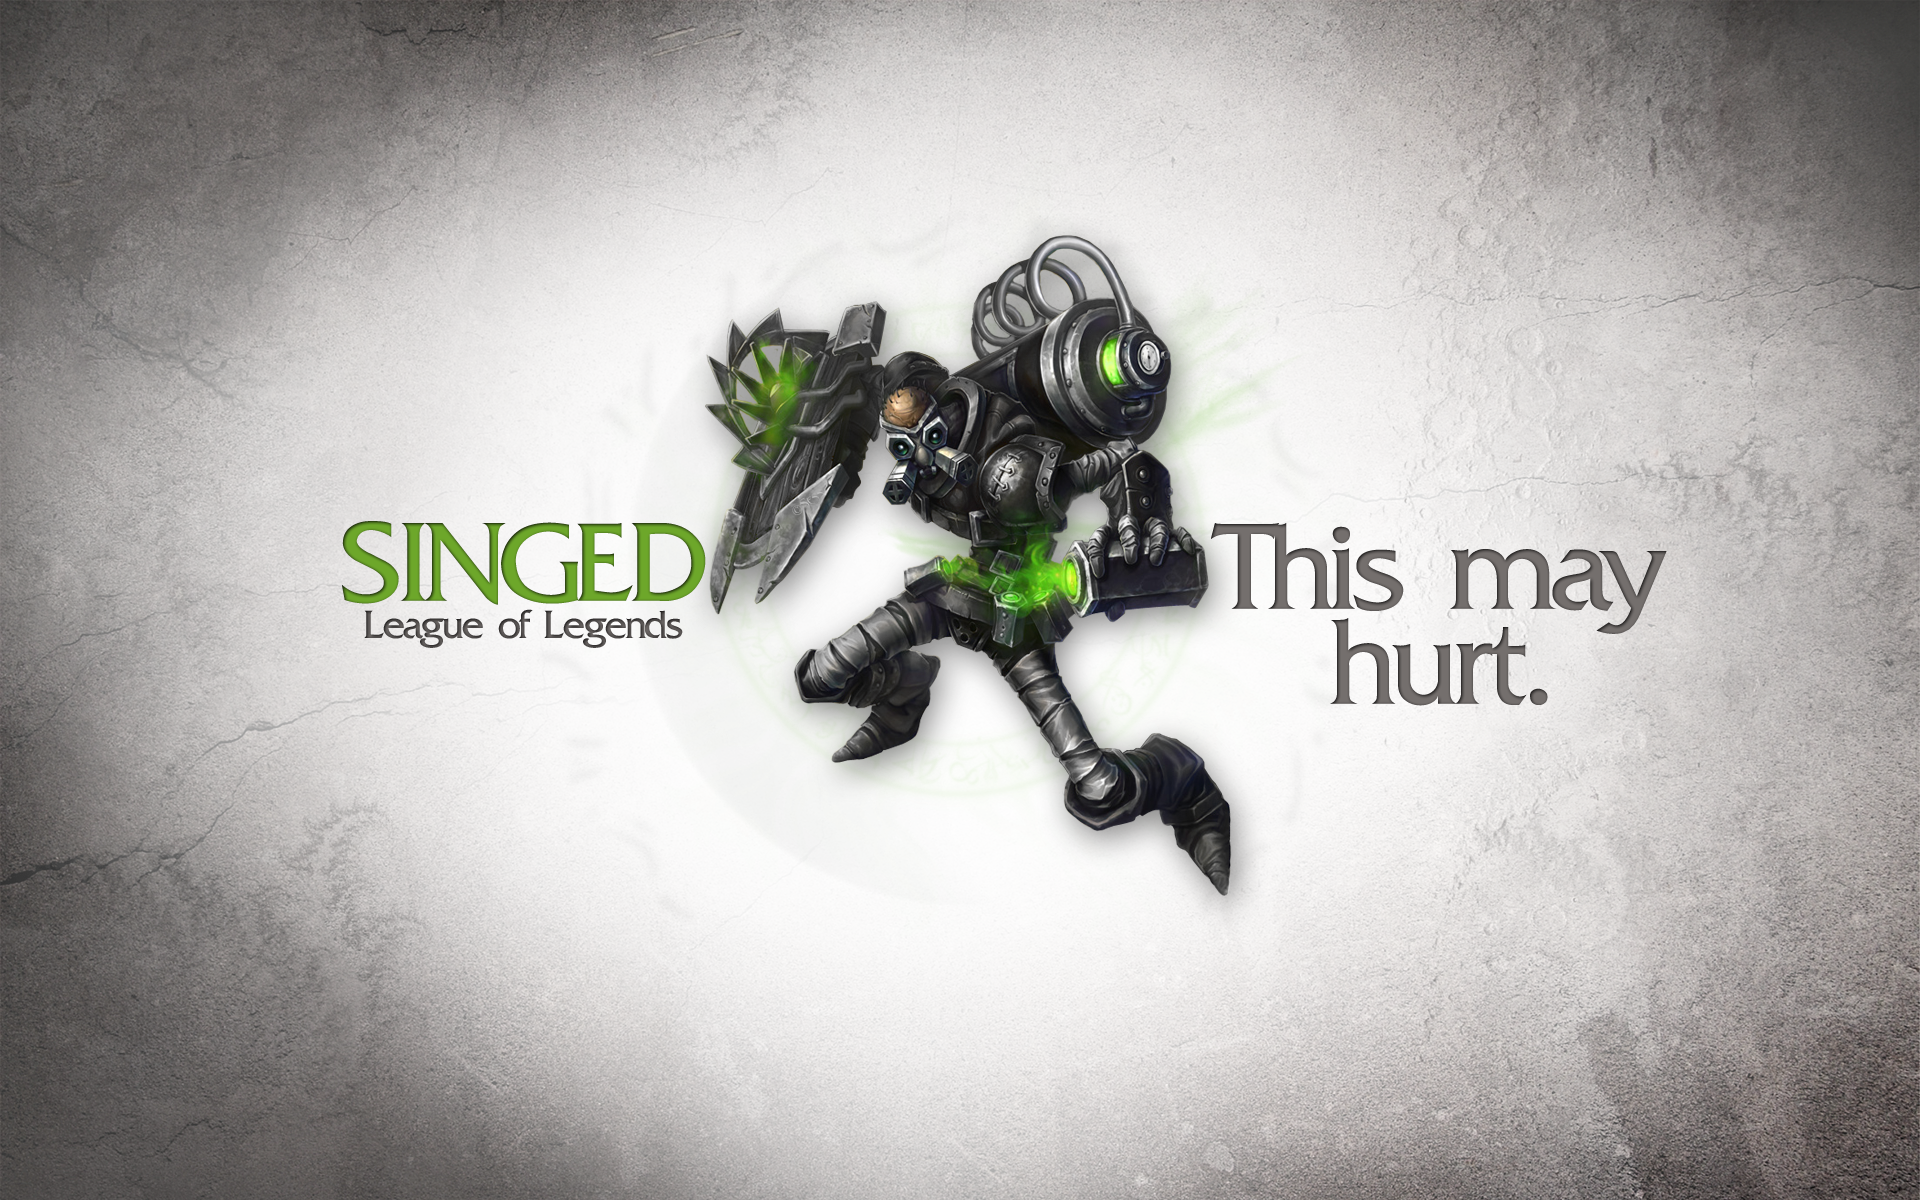 General 1920x1200 League of Legends Singed PC gaming Singed (League of Legends) video game art